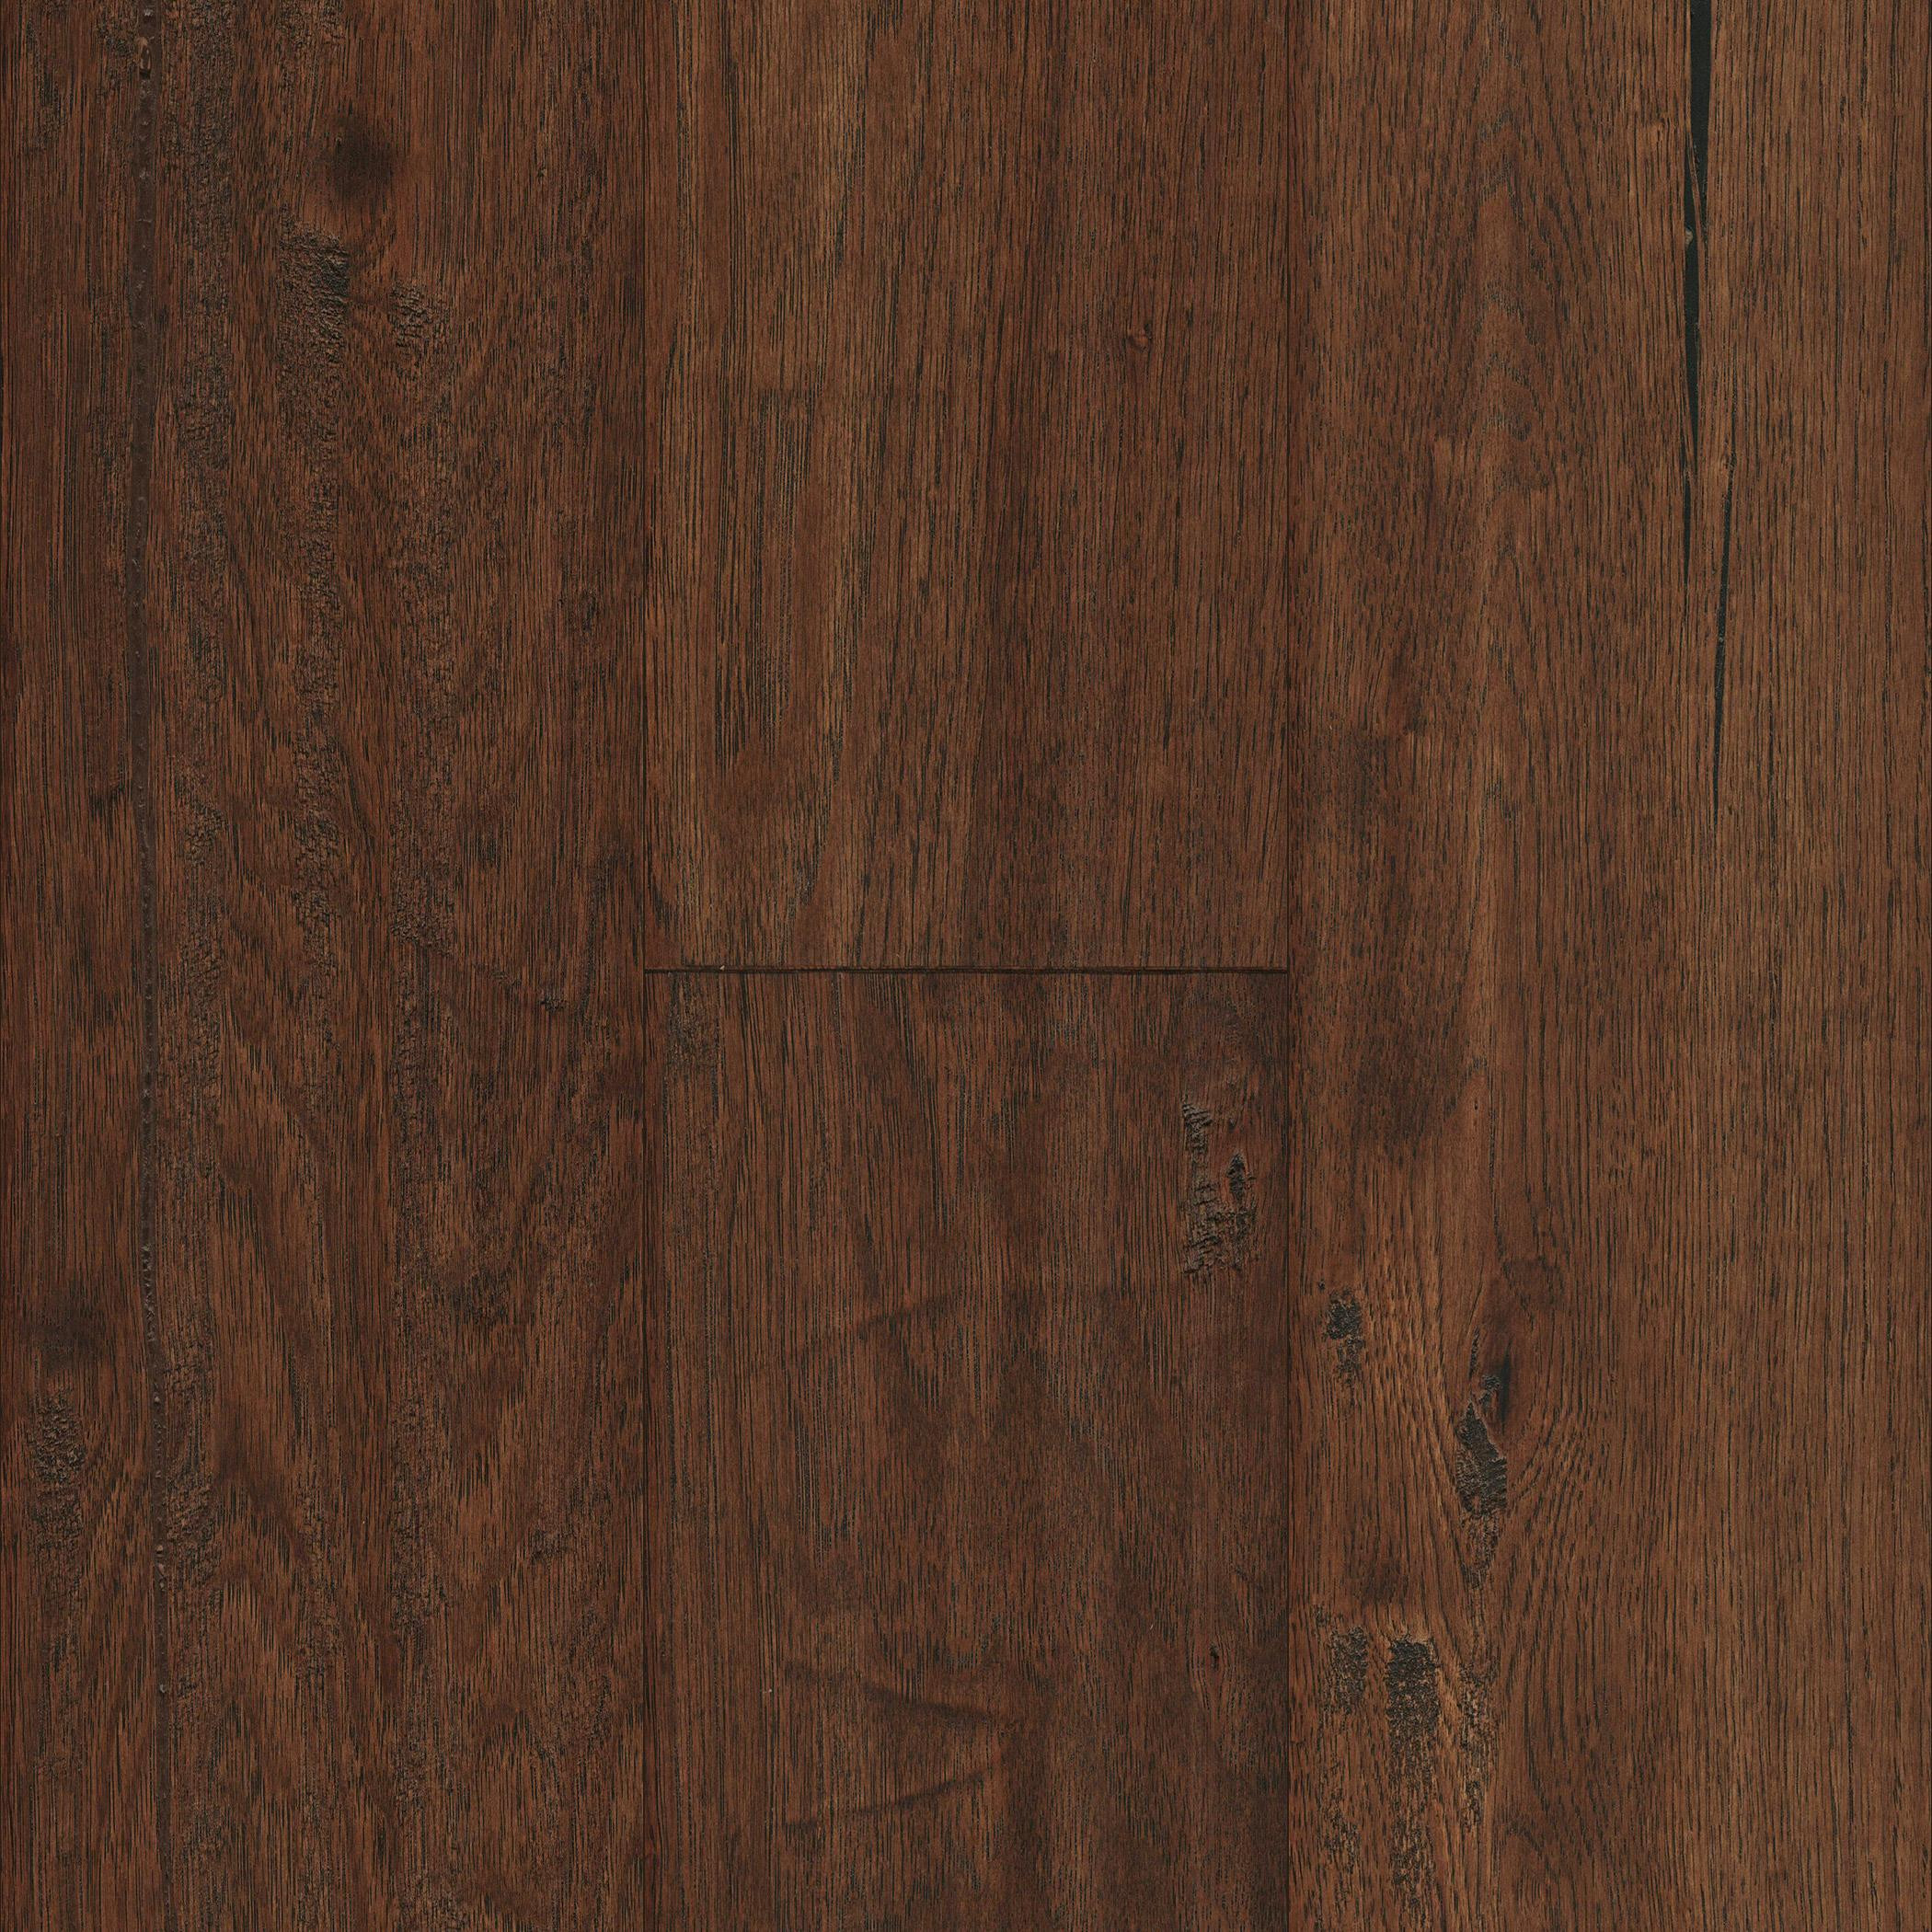 15 attractive Hardwood Floor Finish Options 2024 free download hardwood floor finish options of mullican san marco hickory provincial 7 sculpted engineered intended for mullican san marco hickory provincial 7 sculpted engineered hardwood flooring